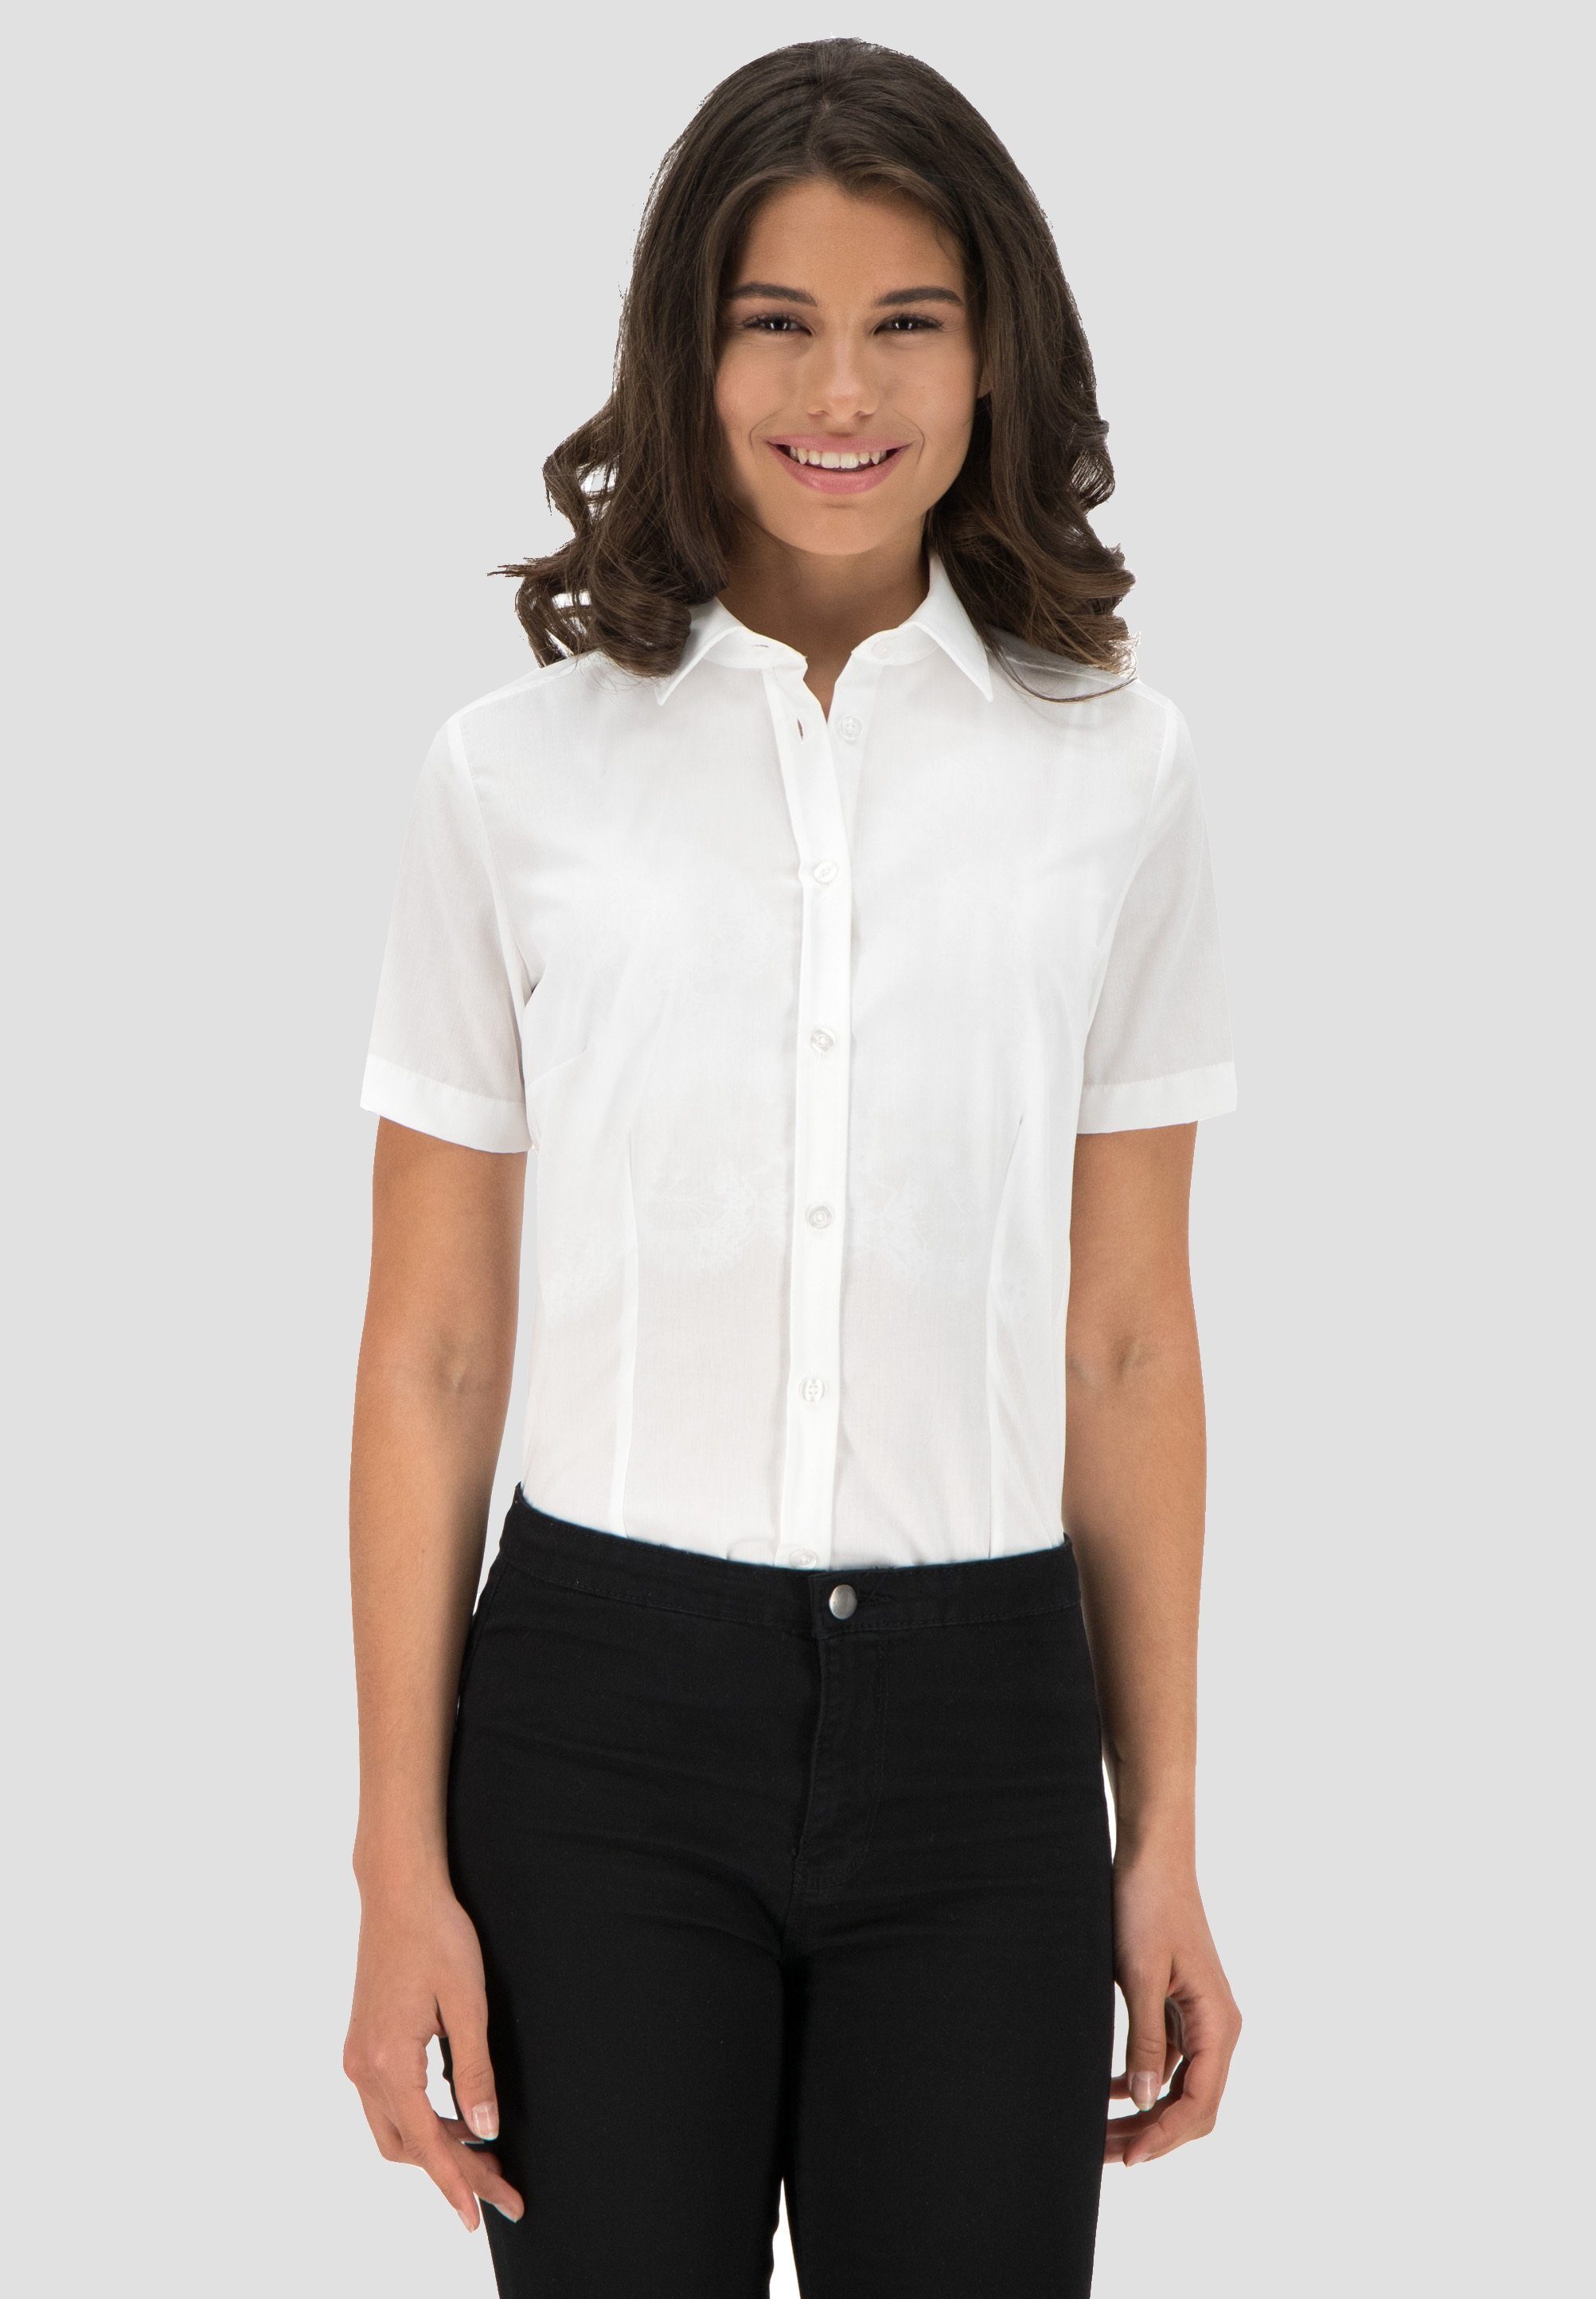 Petermann Flanellbluse Sofia in moderner Slim Fit-Passform